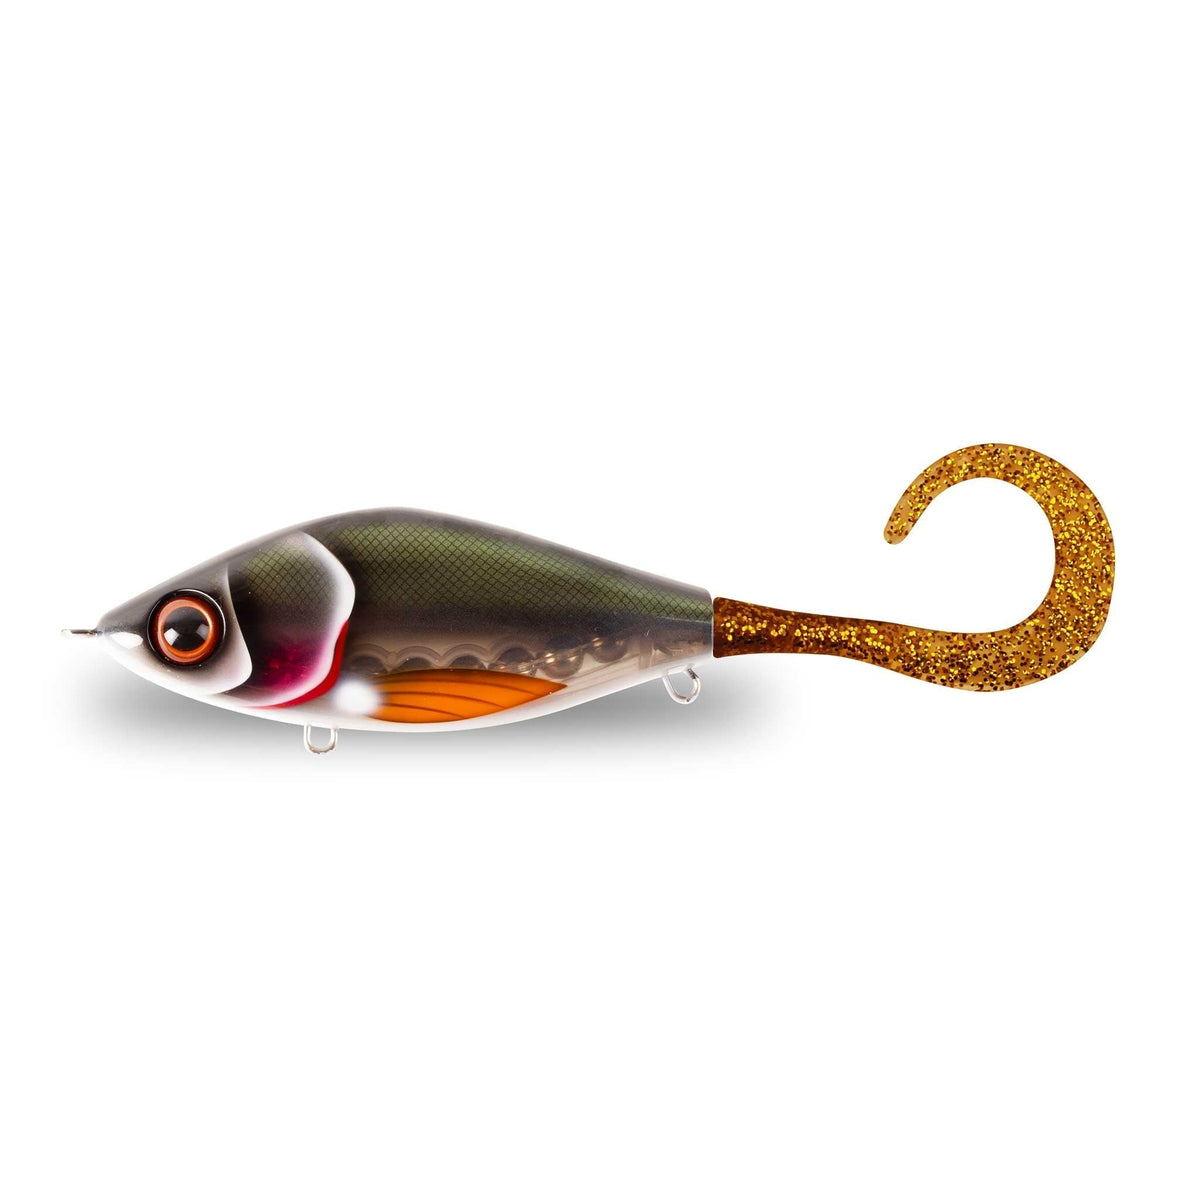 Top\Best Musky\Muskie\Pike Jerk-Baits Explained and Reviewed 